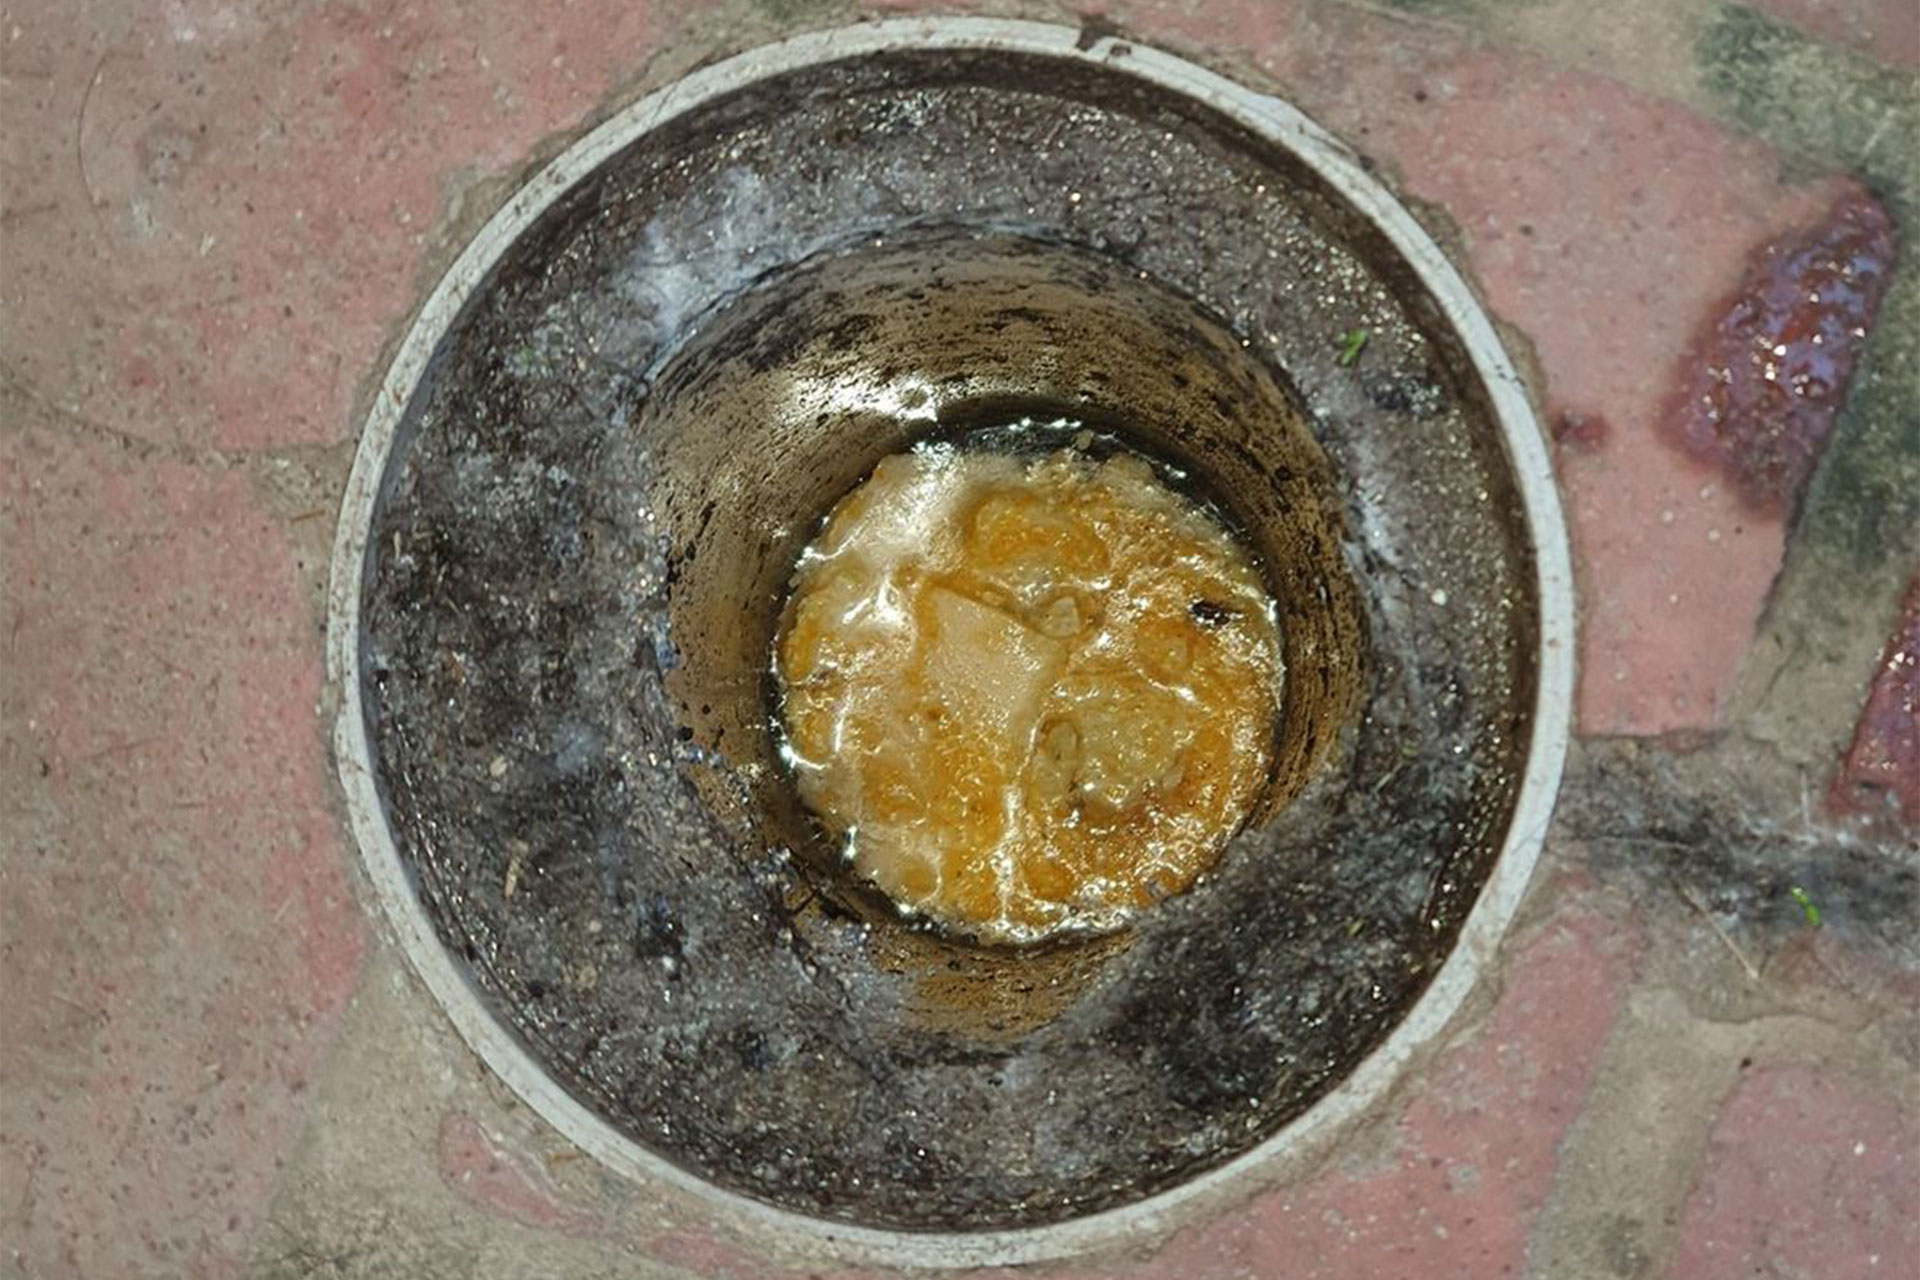 A drain blocked by oil and fat, common household items that don't belong down drains.